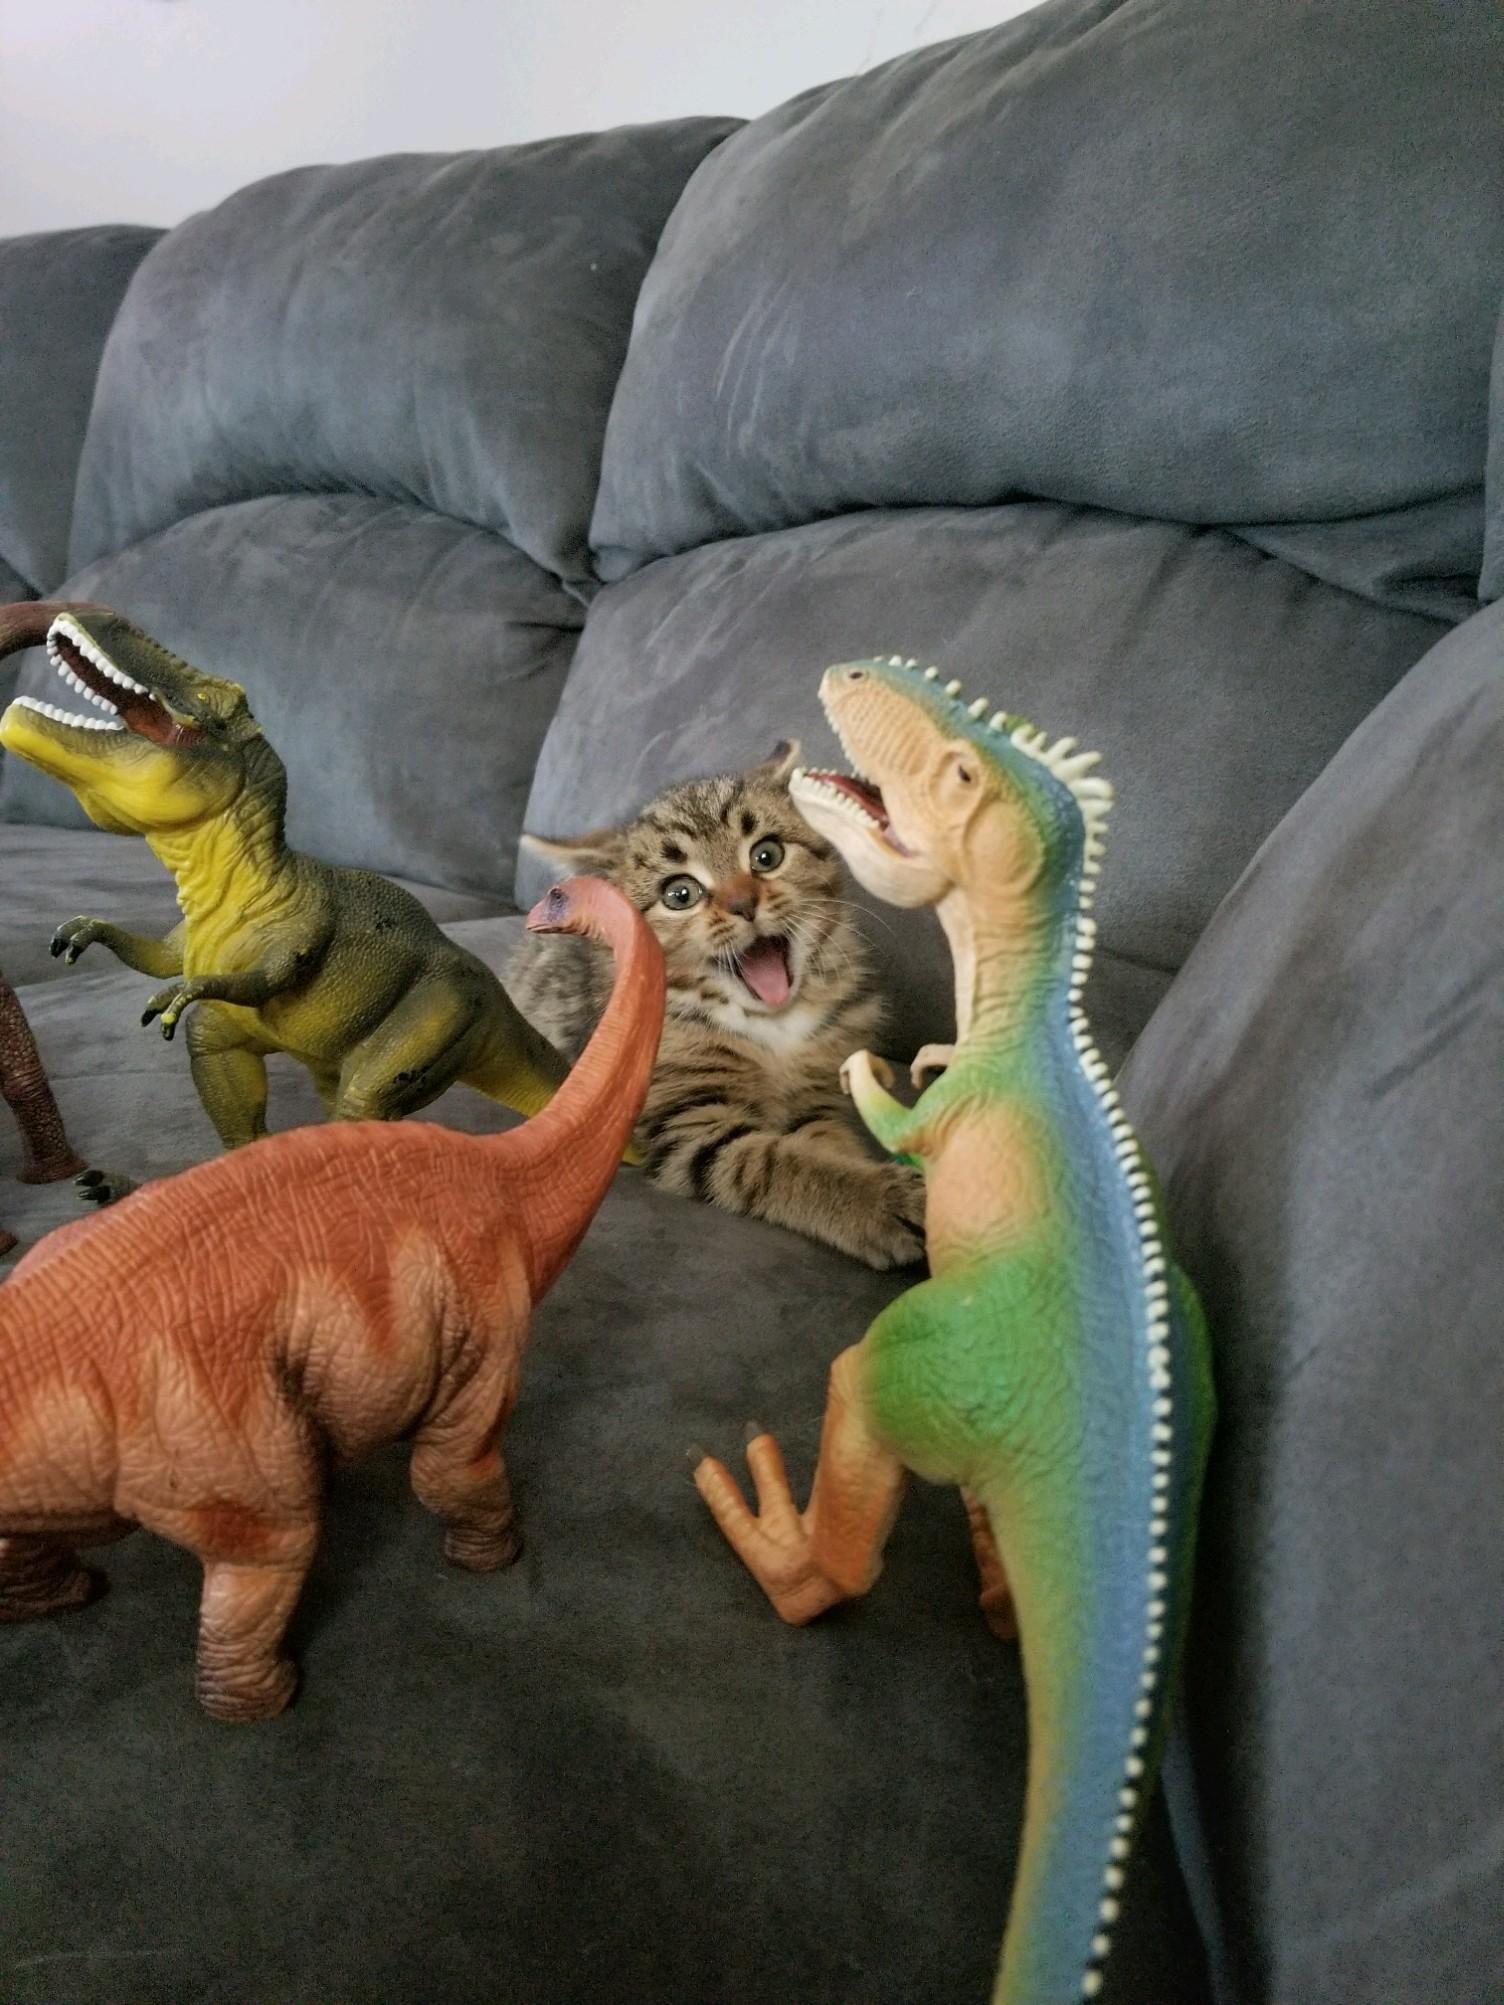 When dinosaurs attack!